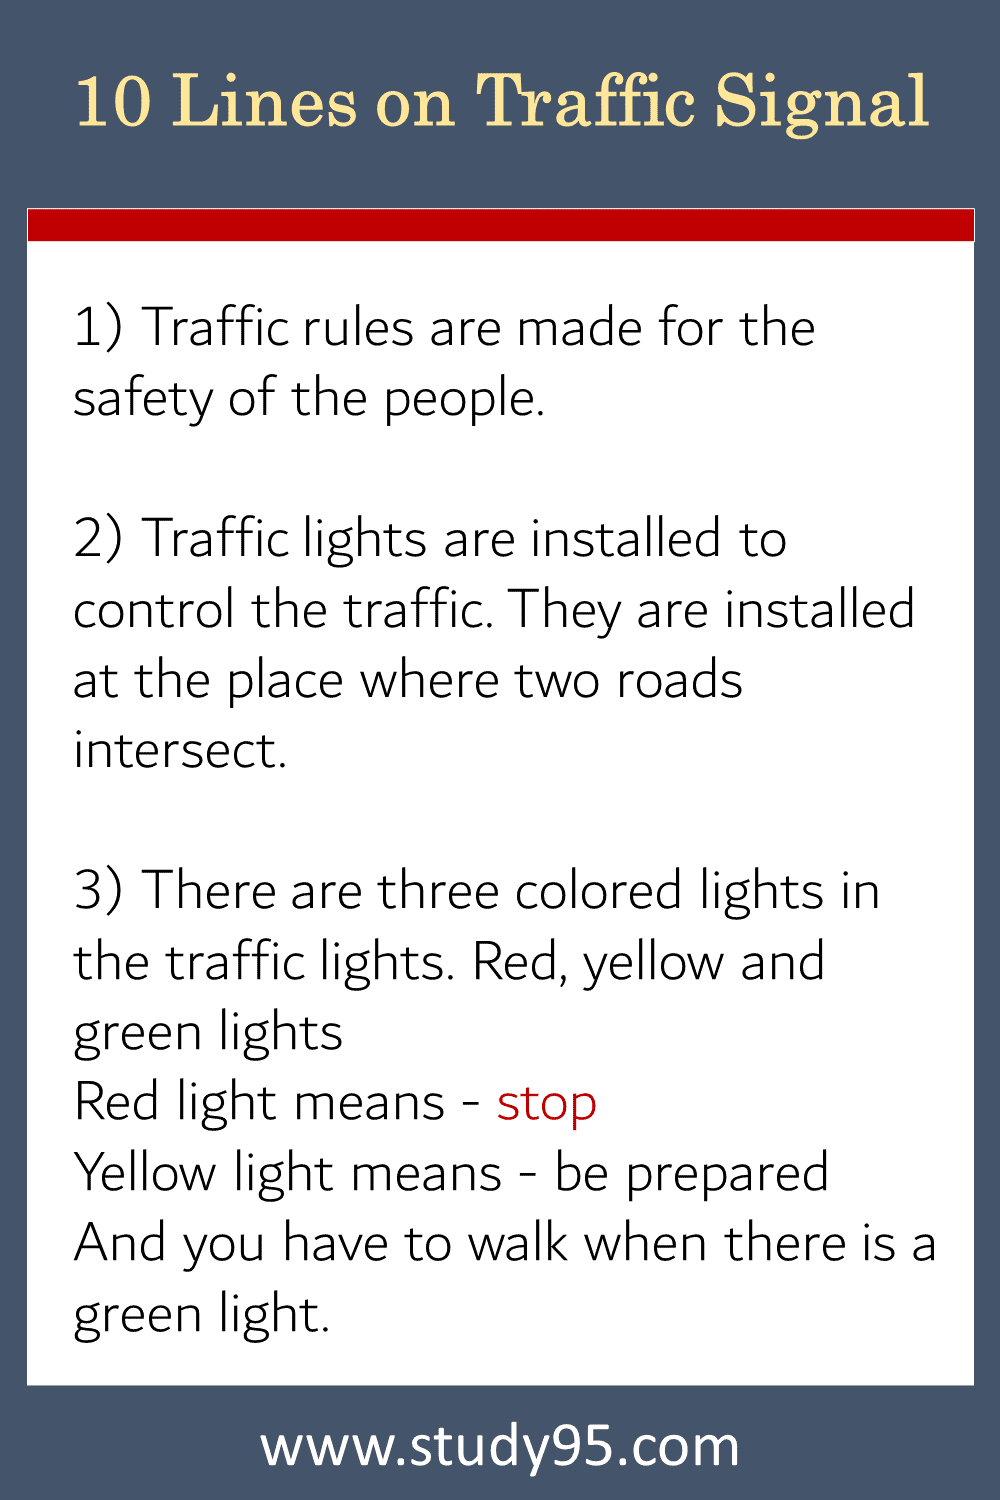 10 Lines on Traffic Rules